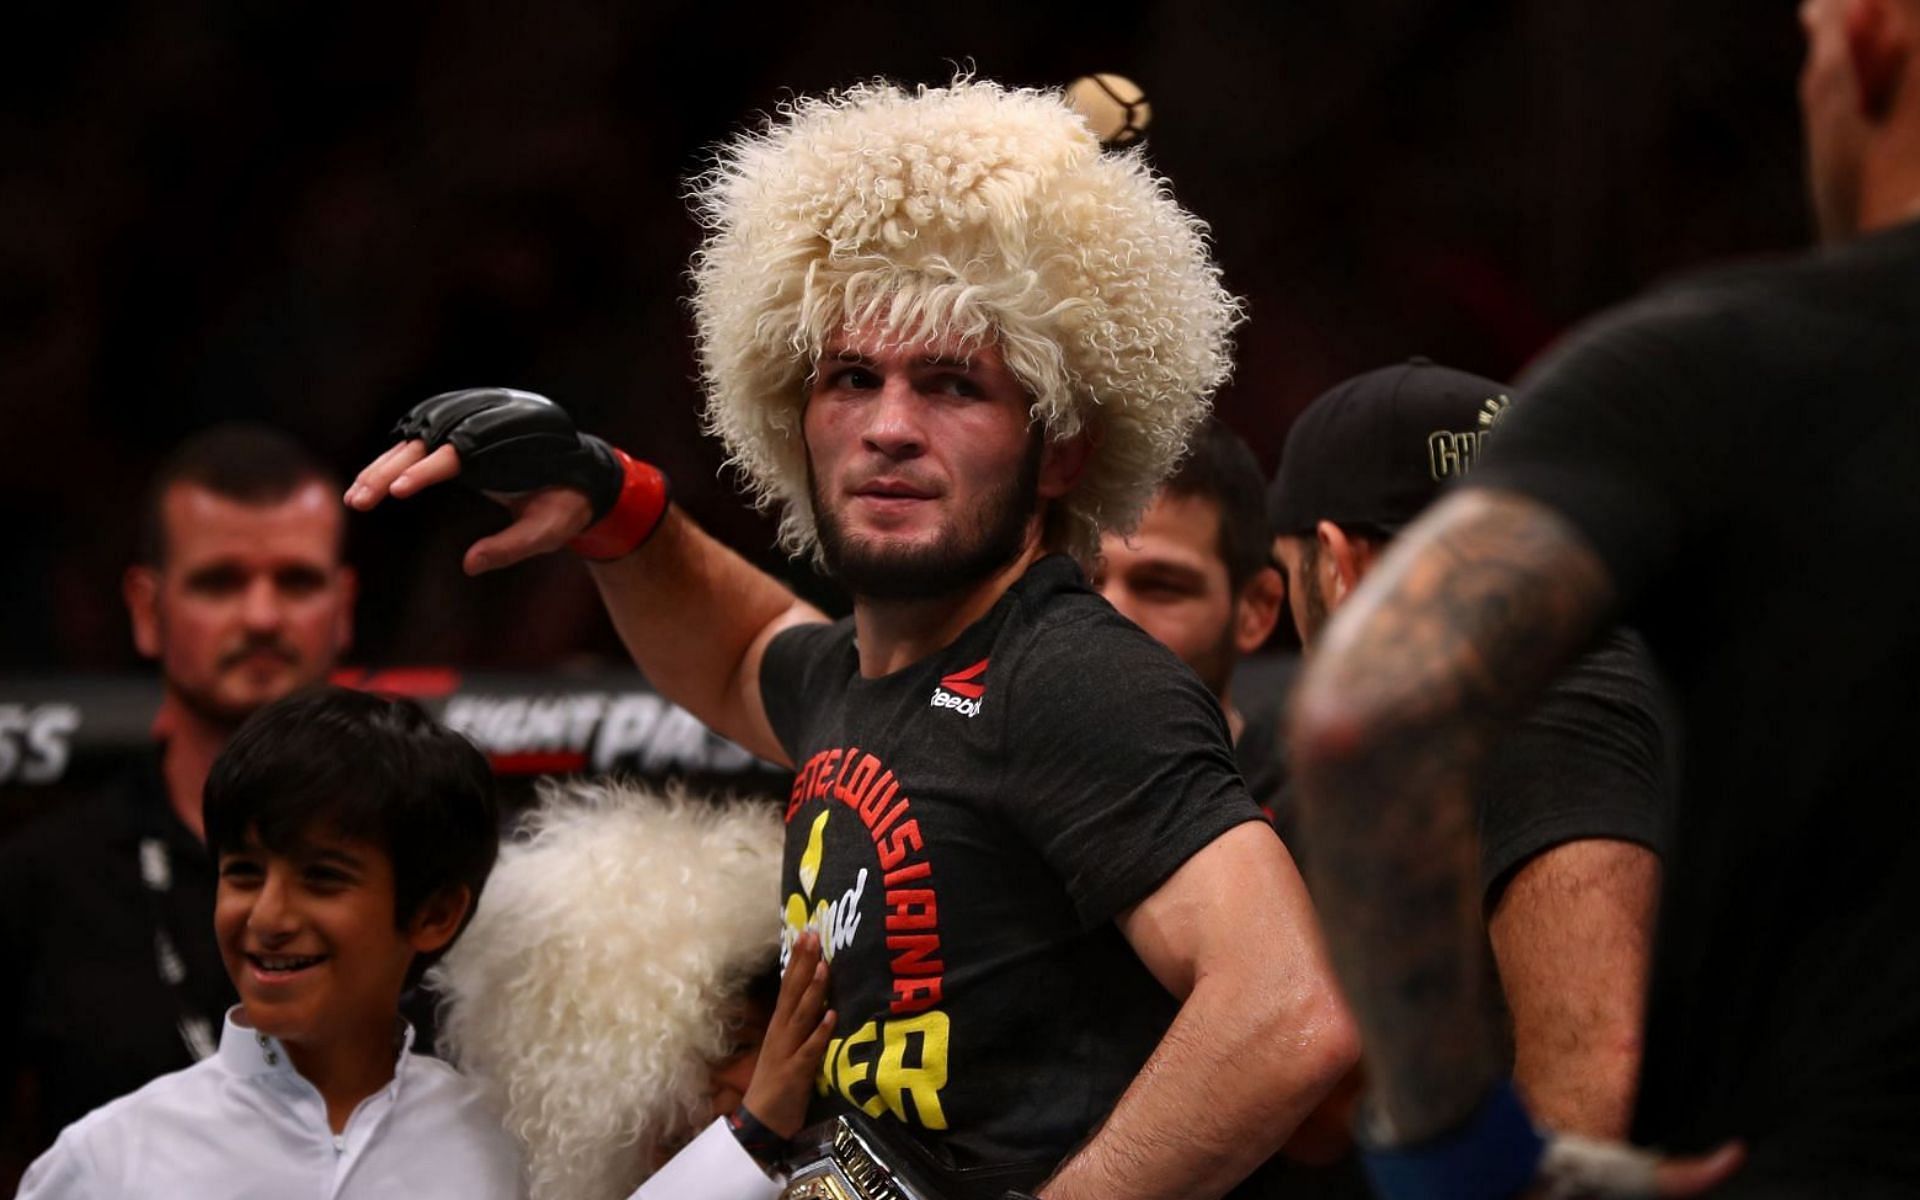 Khabib Nurmagomedov has revealed that he wants Eagle Fighting Championship to have 7-8 events in the United States last year